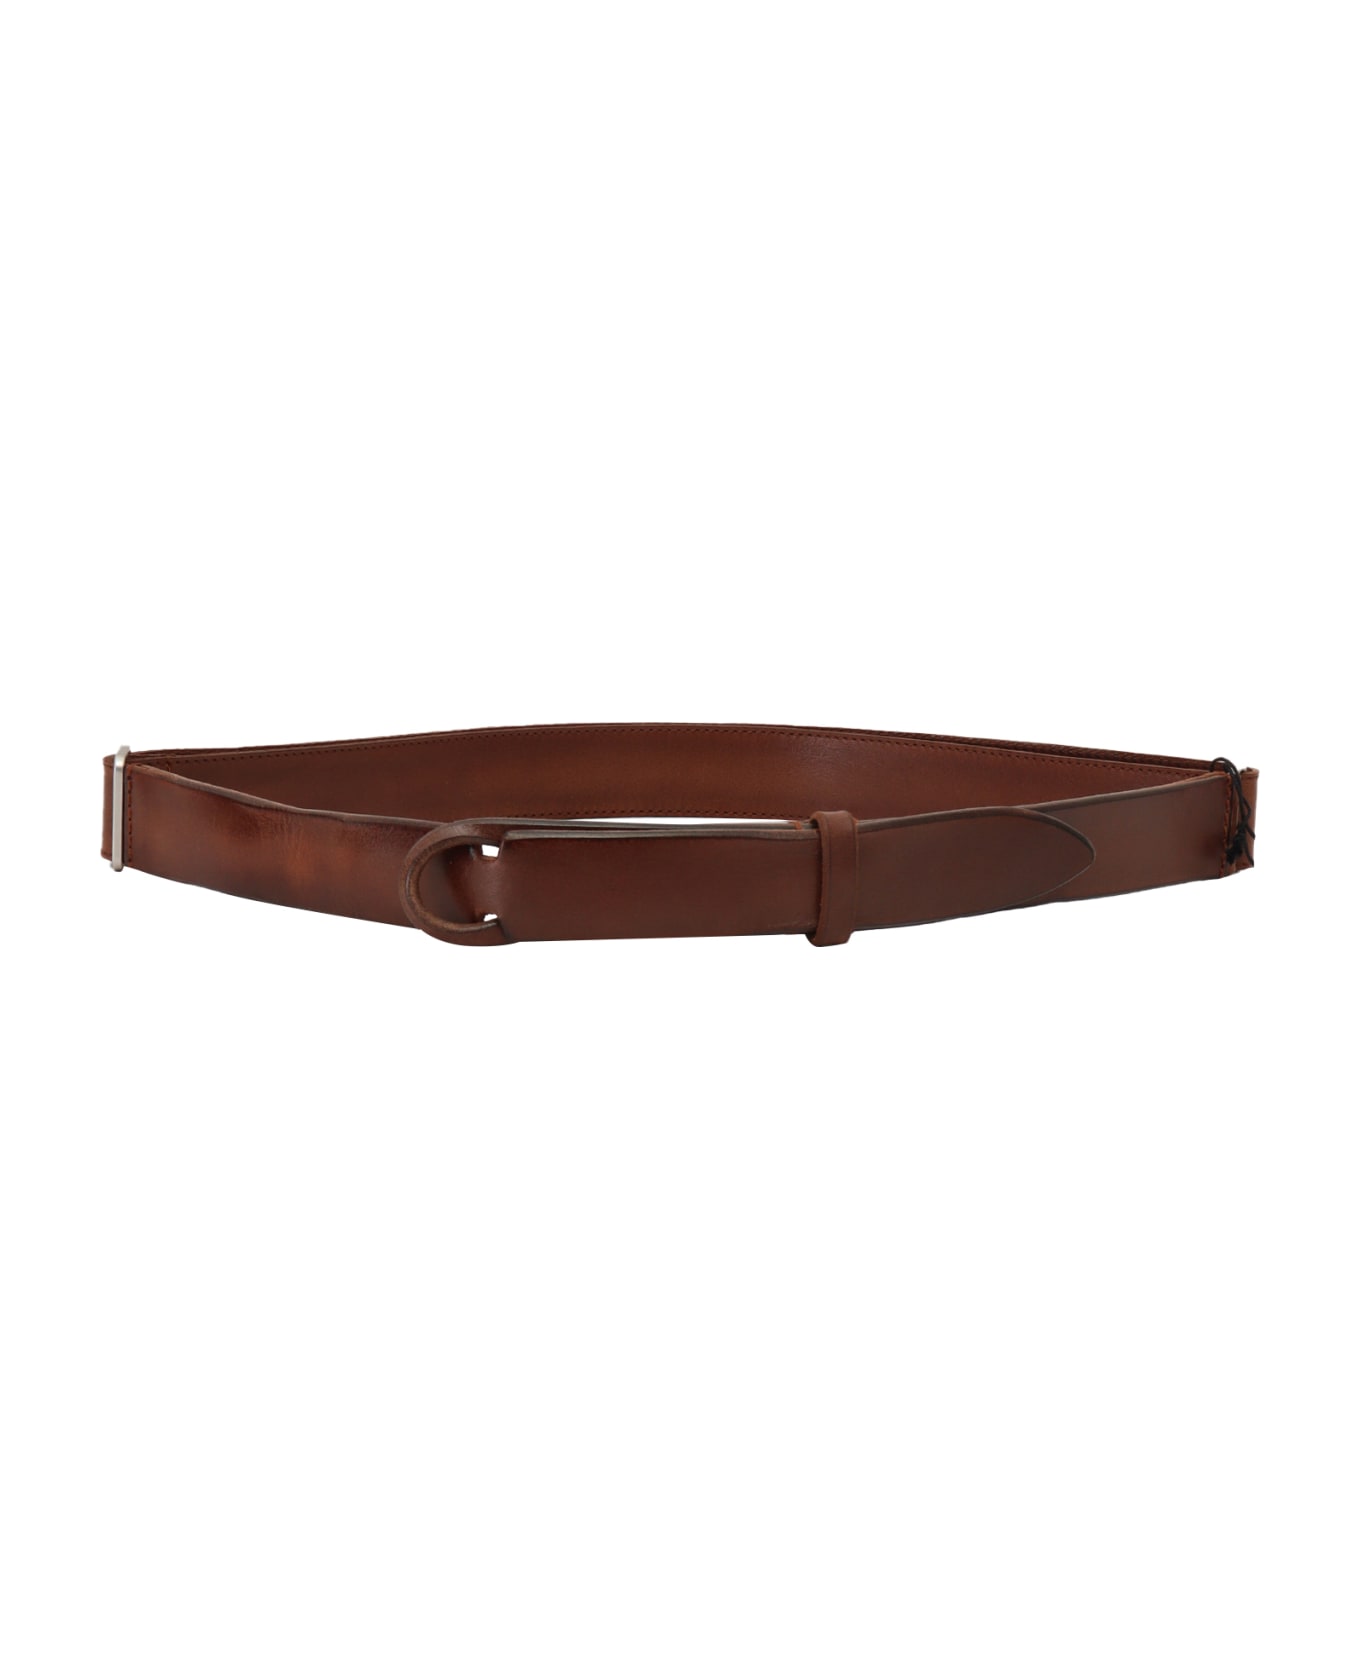 Orciani No Buckle Belt - BROWN ベルト